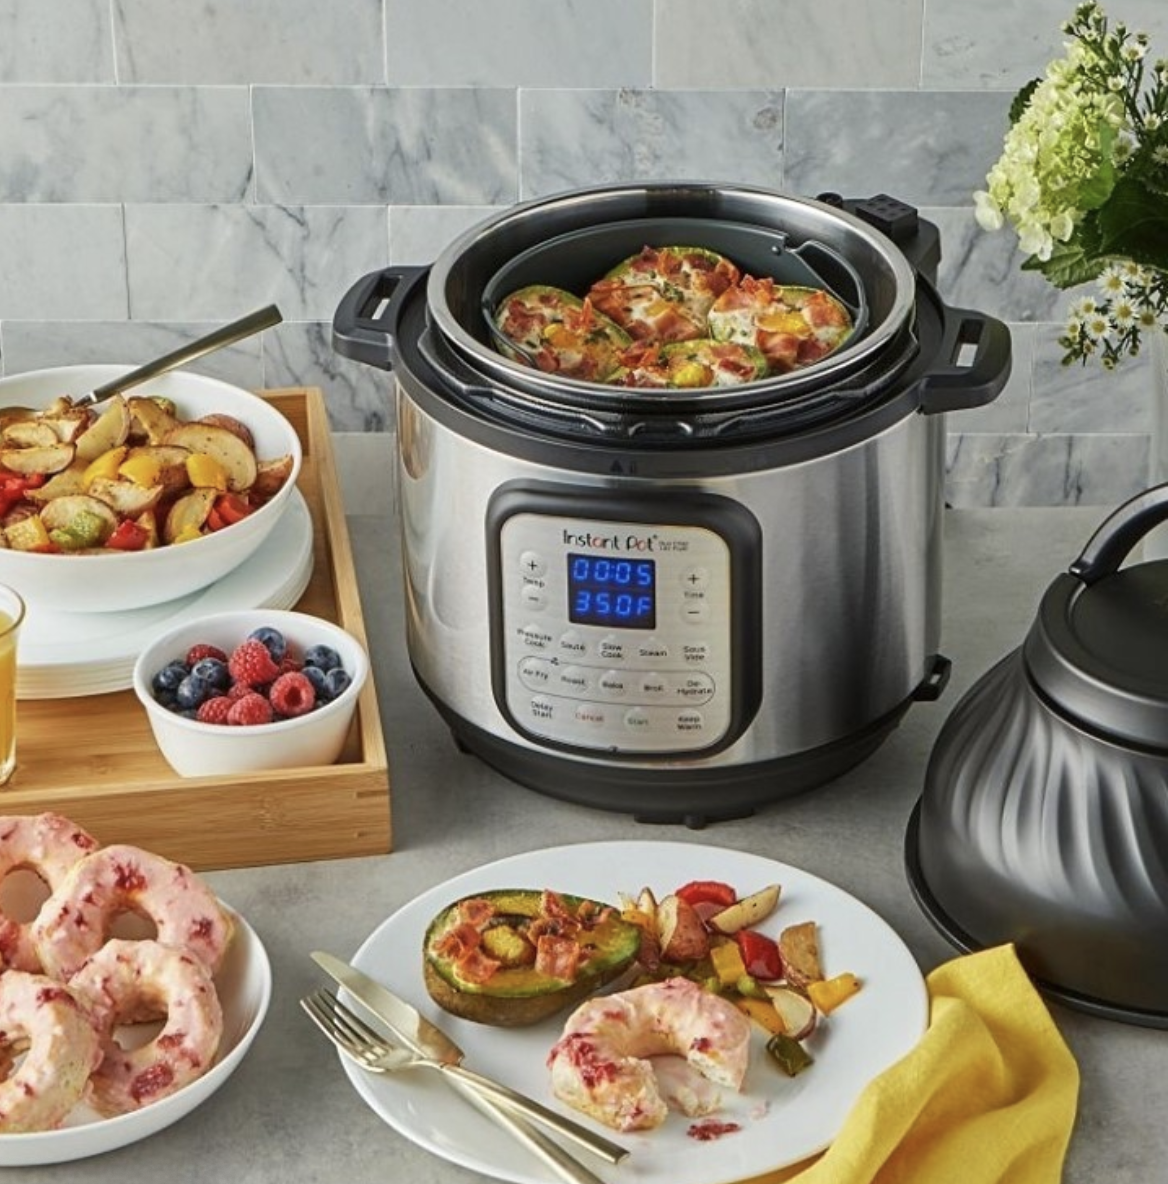 The cylinder shaped Instant pot with a control panel showing settings and temp